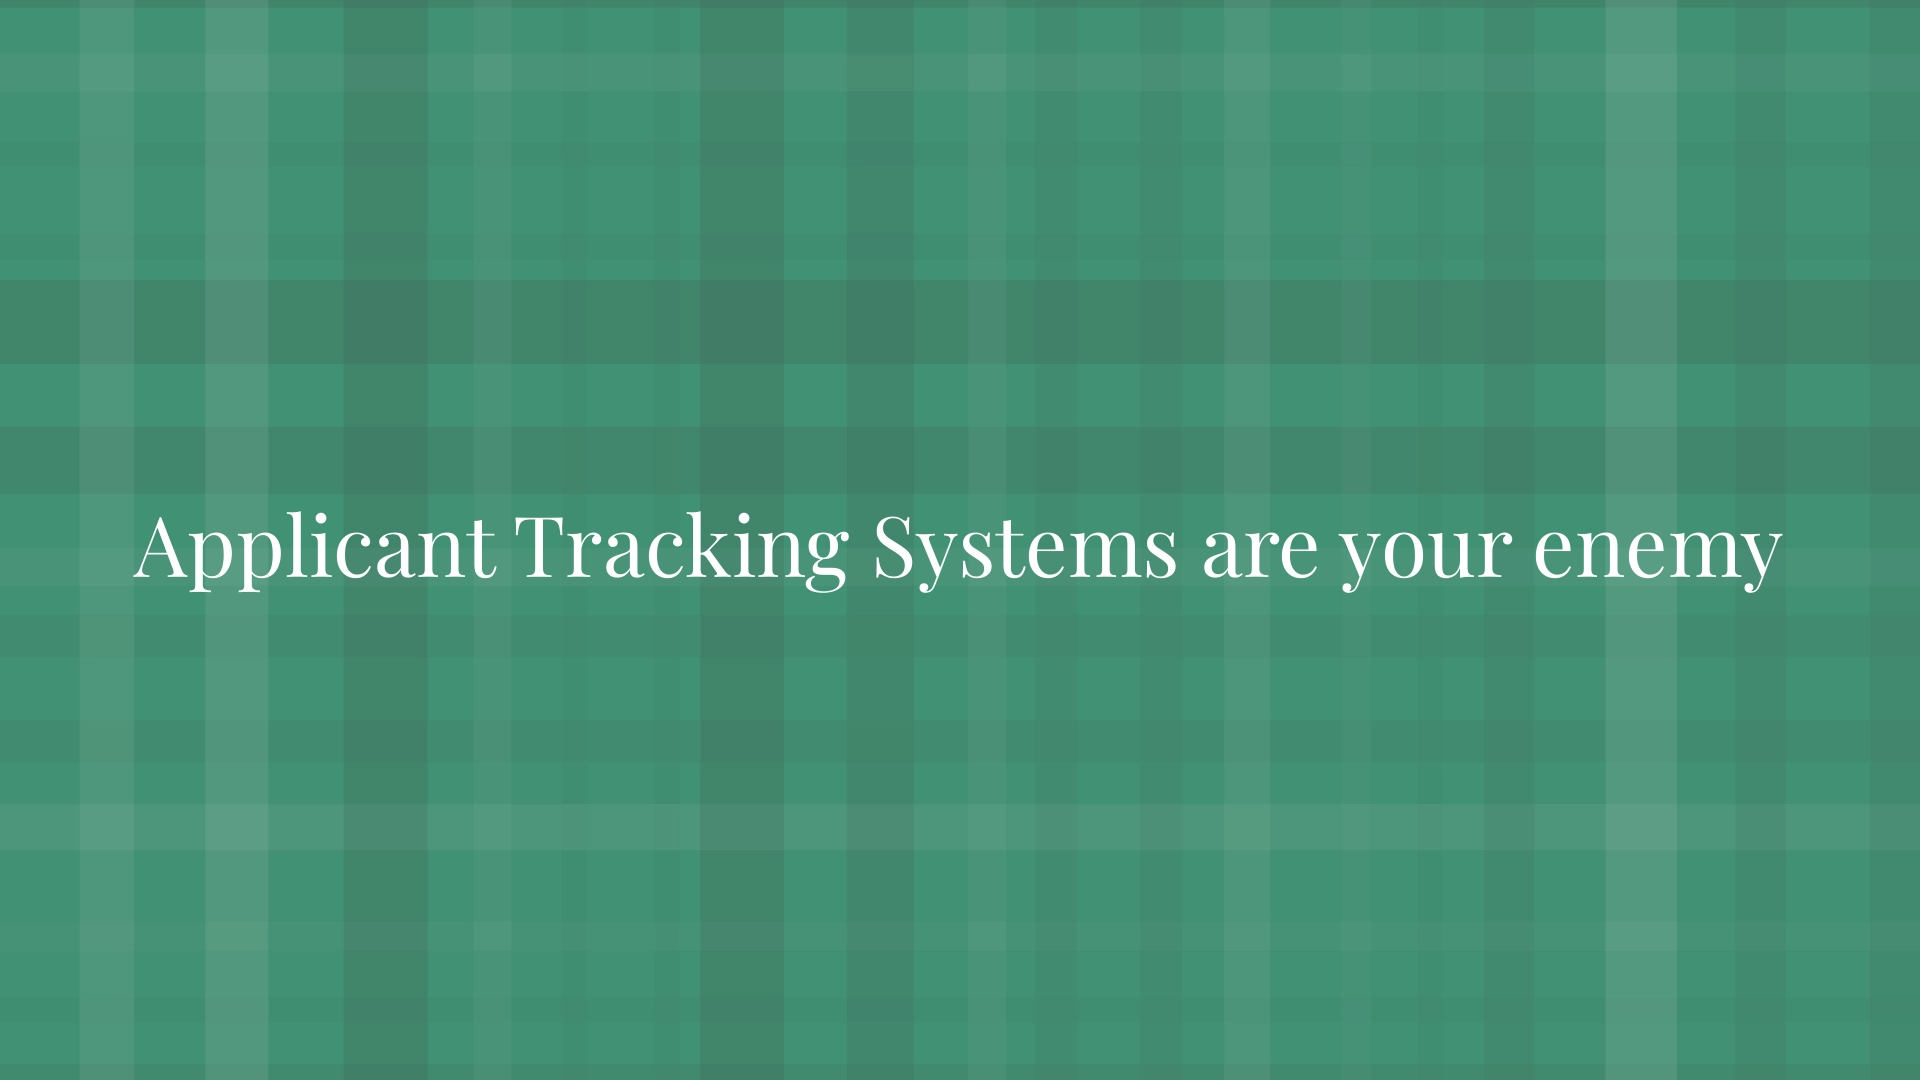 Applicant Tracking Systems are your enemy